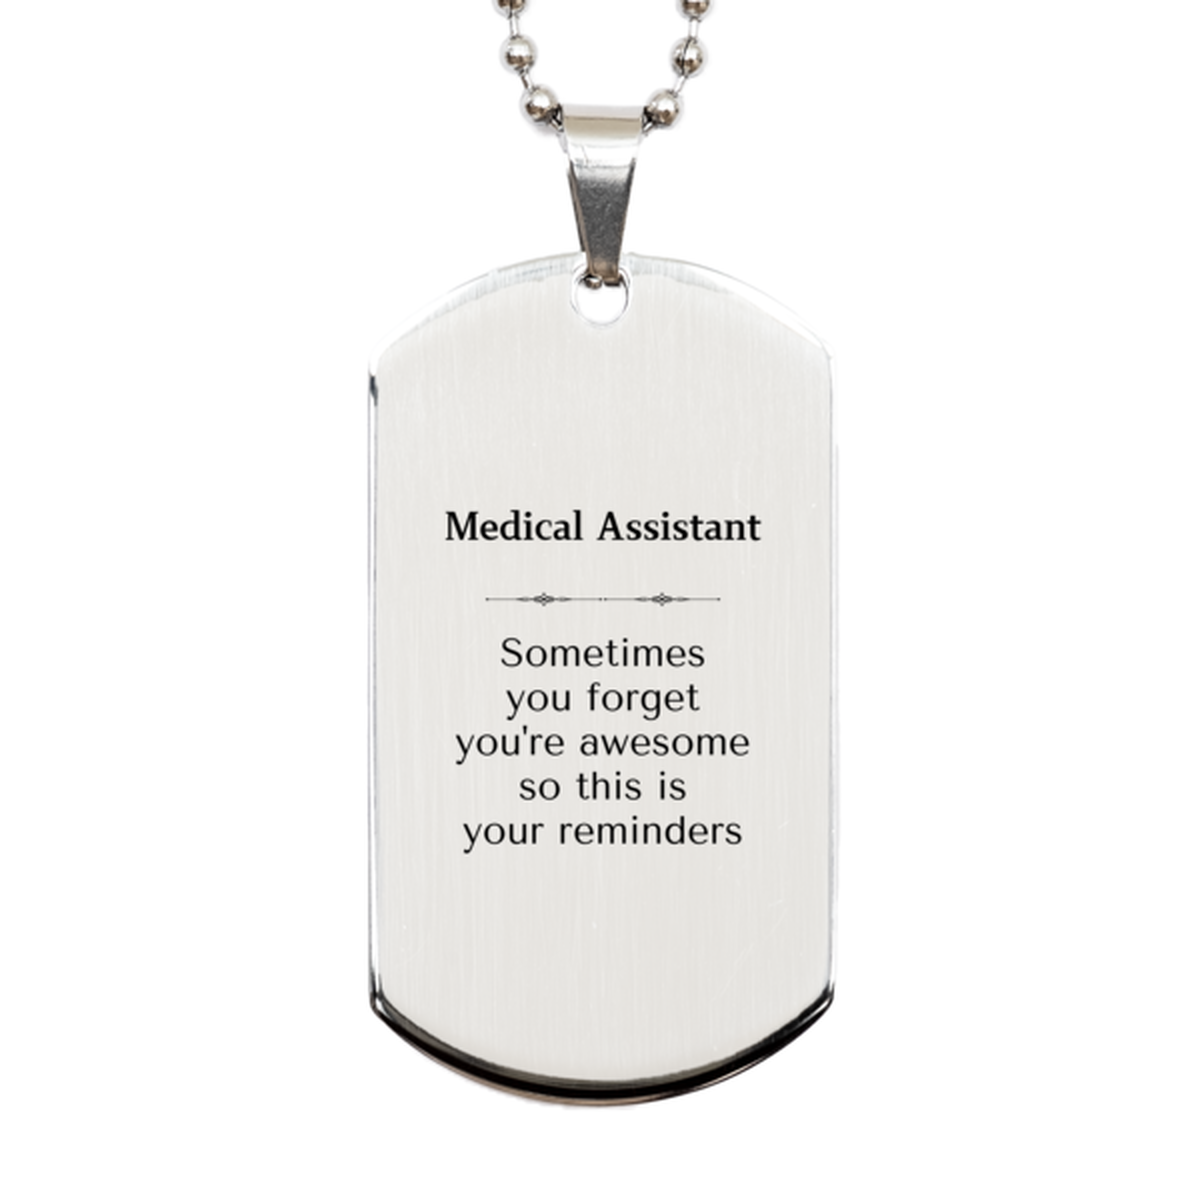 Sentimental Medical Assistant Silver Dog Tag, Medical Assistant Sometimes you forget you're awesome so this is your reminders, Graduation Christmas Birthday Gifts for Medical Assistant, Men, Women, Coworkers